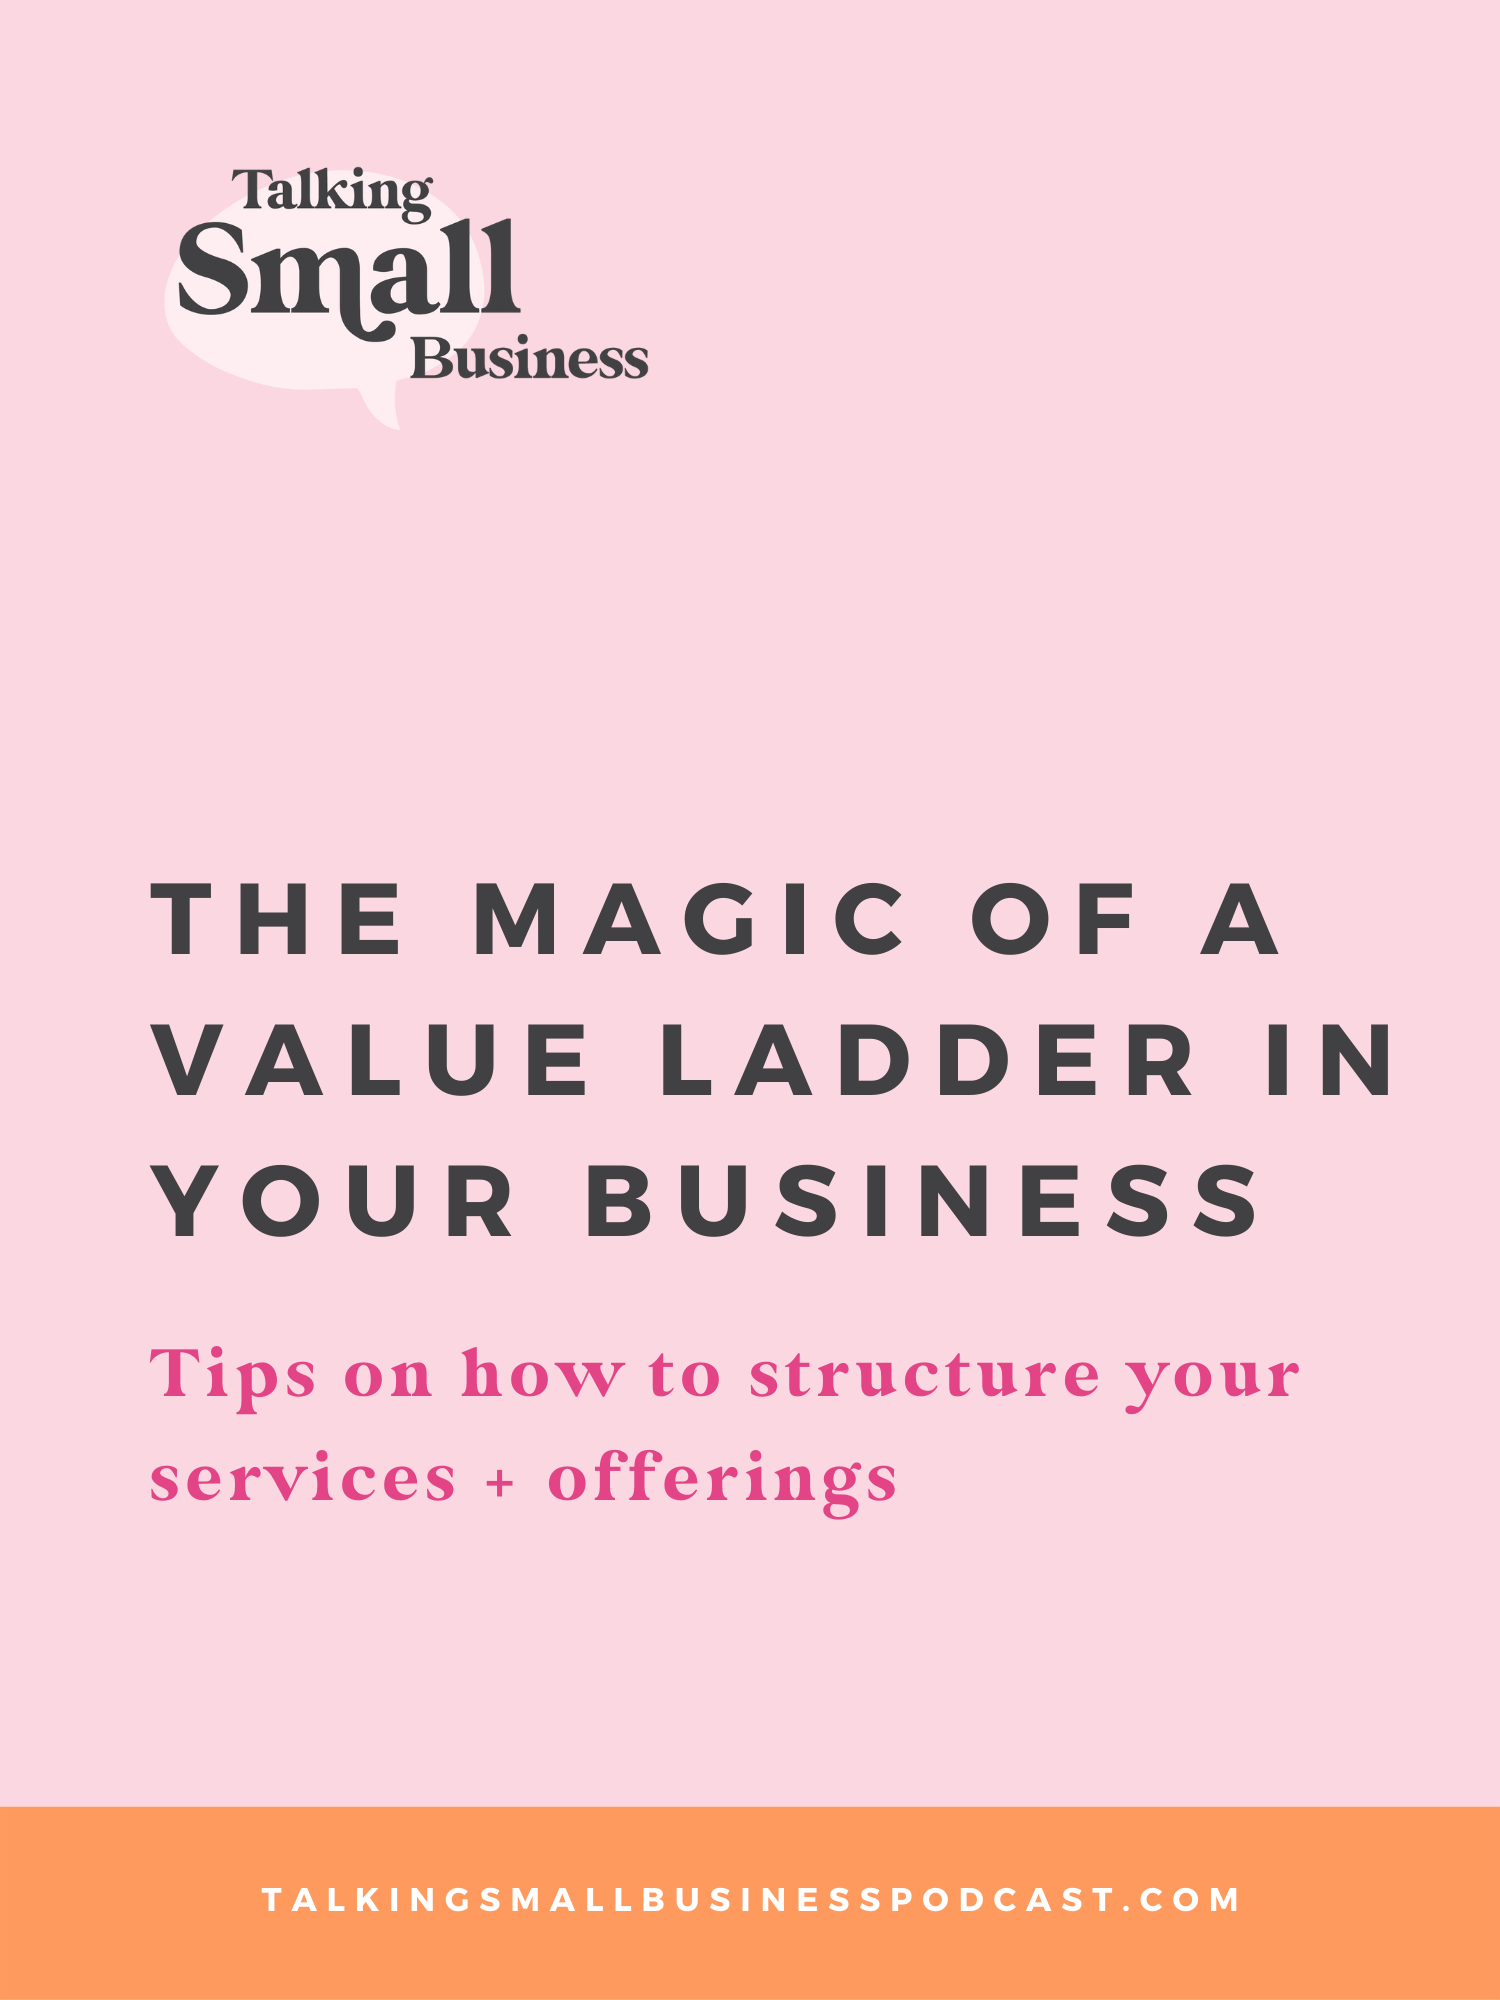 The Magic of a Value Ladder in Your Business: Kat Schmoyer and Megan Martin discuss how to strategically present your offerings